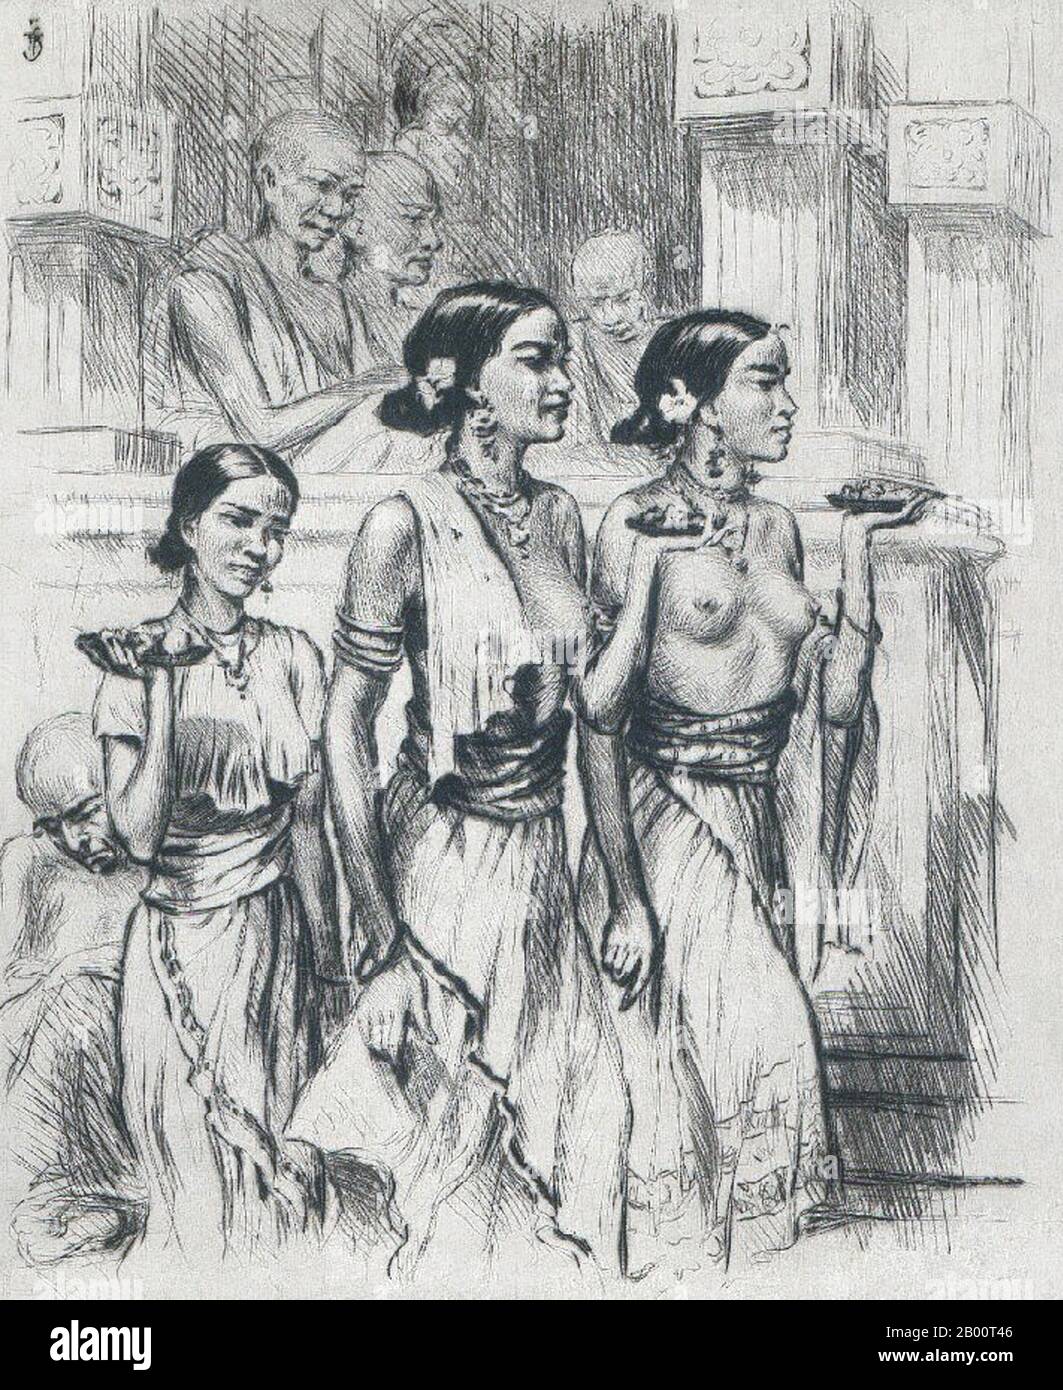 Sri Lanka/Czechoslovakia: 'At the Entrance to the Temple of the Tooth, Kandy'. Illustration by T. F. Simon (1877-1942), c. 1928.  Tavik Frantisek Simon (1877–1942), was a Czech painter, etcher, and woodcut artist. Although based mainly in Europe, his extensive travels took him to Morocco, Ceylon (now Sri Lanka), India, and Japan, images of all of which appear in his  artistic work. He died in Prague in 1942. Largely ignored during the Communist era in Czechoslovakia, his work has received greater attention in recent years. Stock Photo